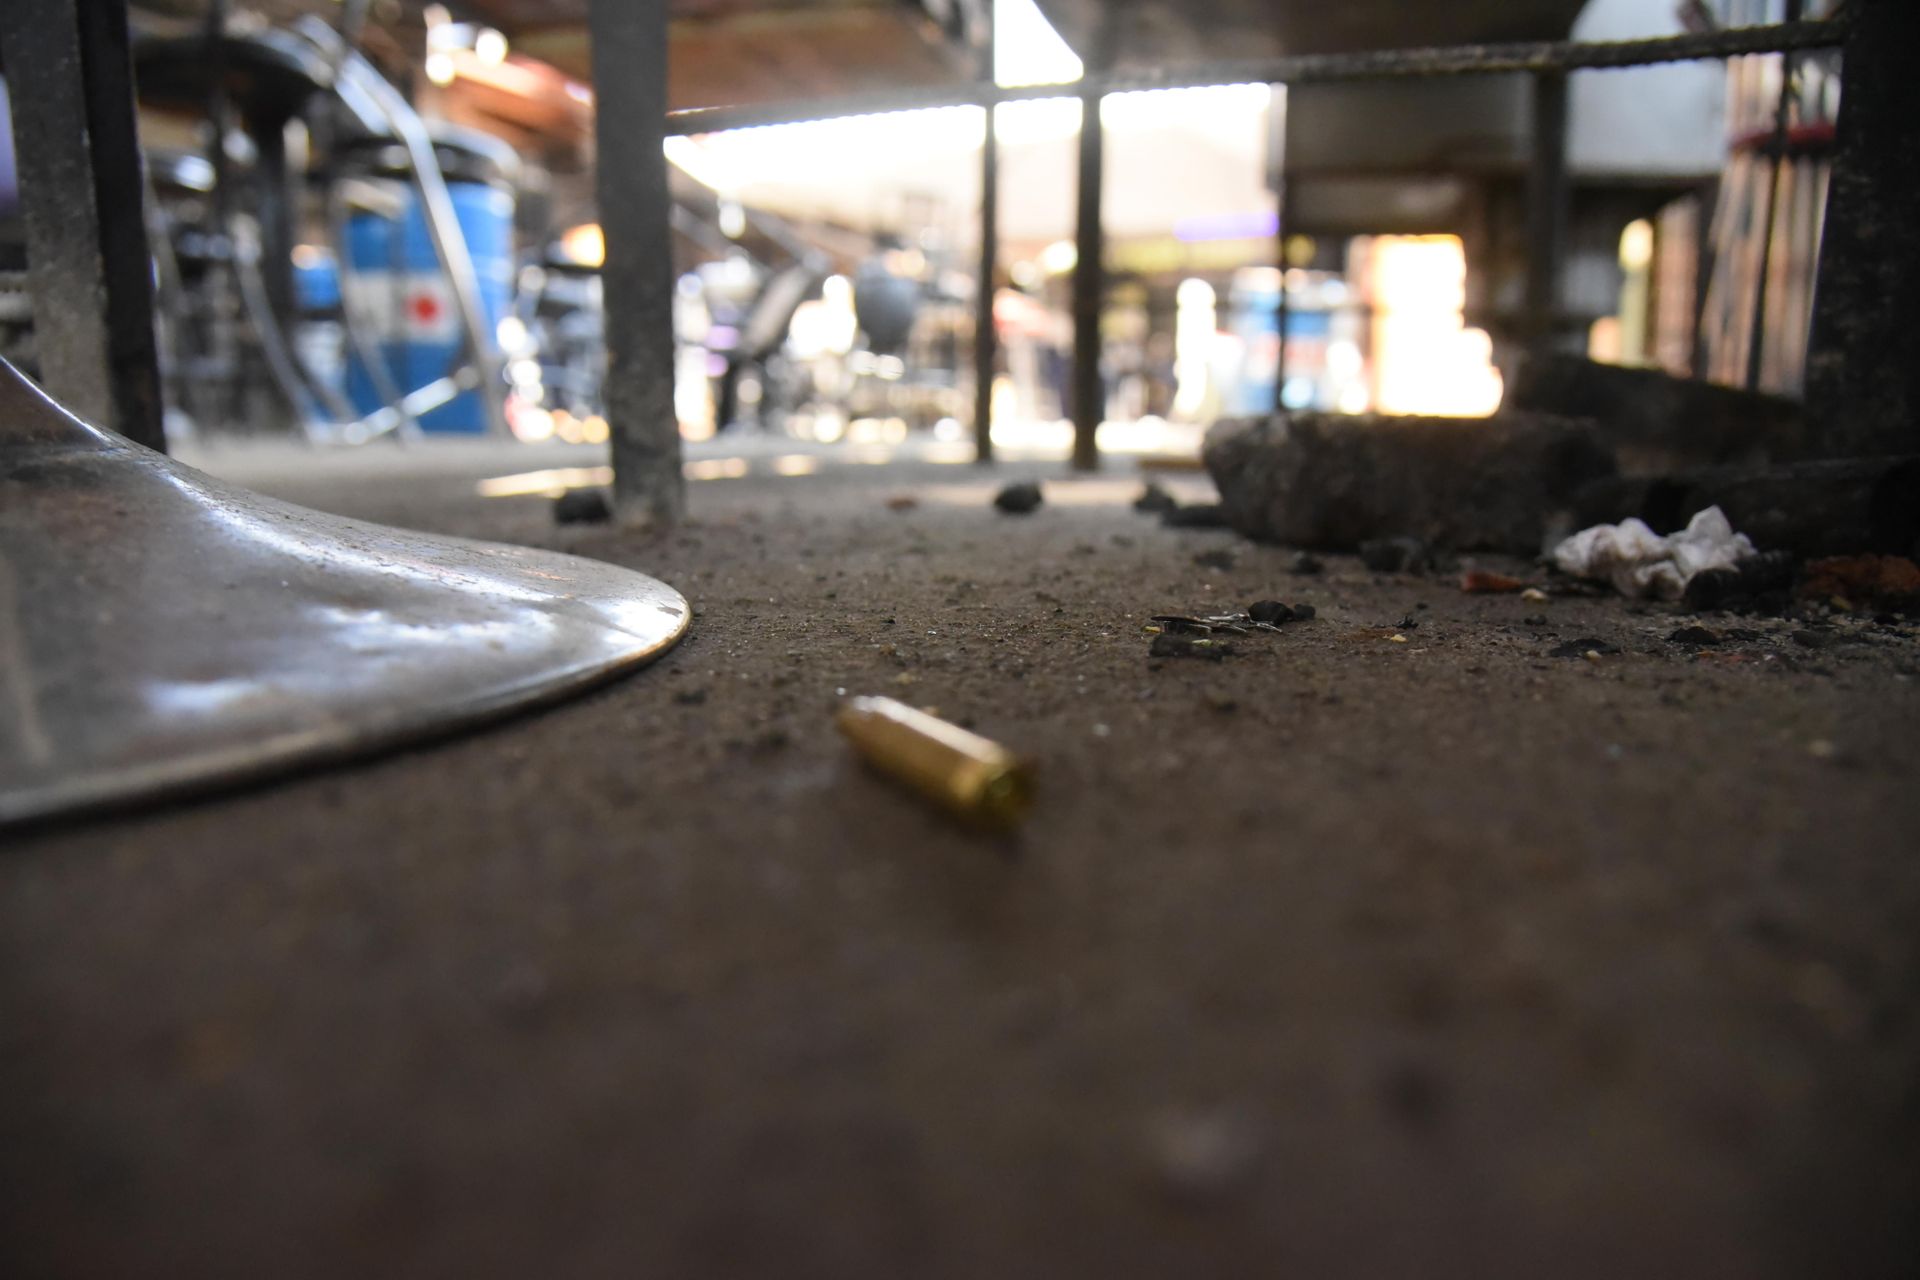 More than one firearm may have been used in Vegas club shooting, Nakuru court told